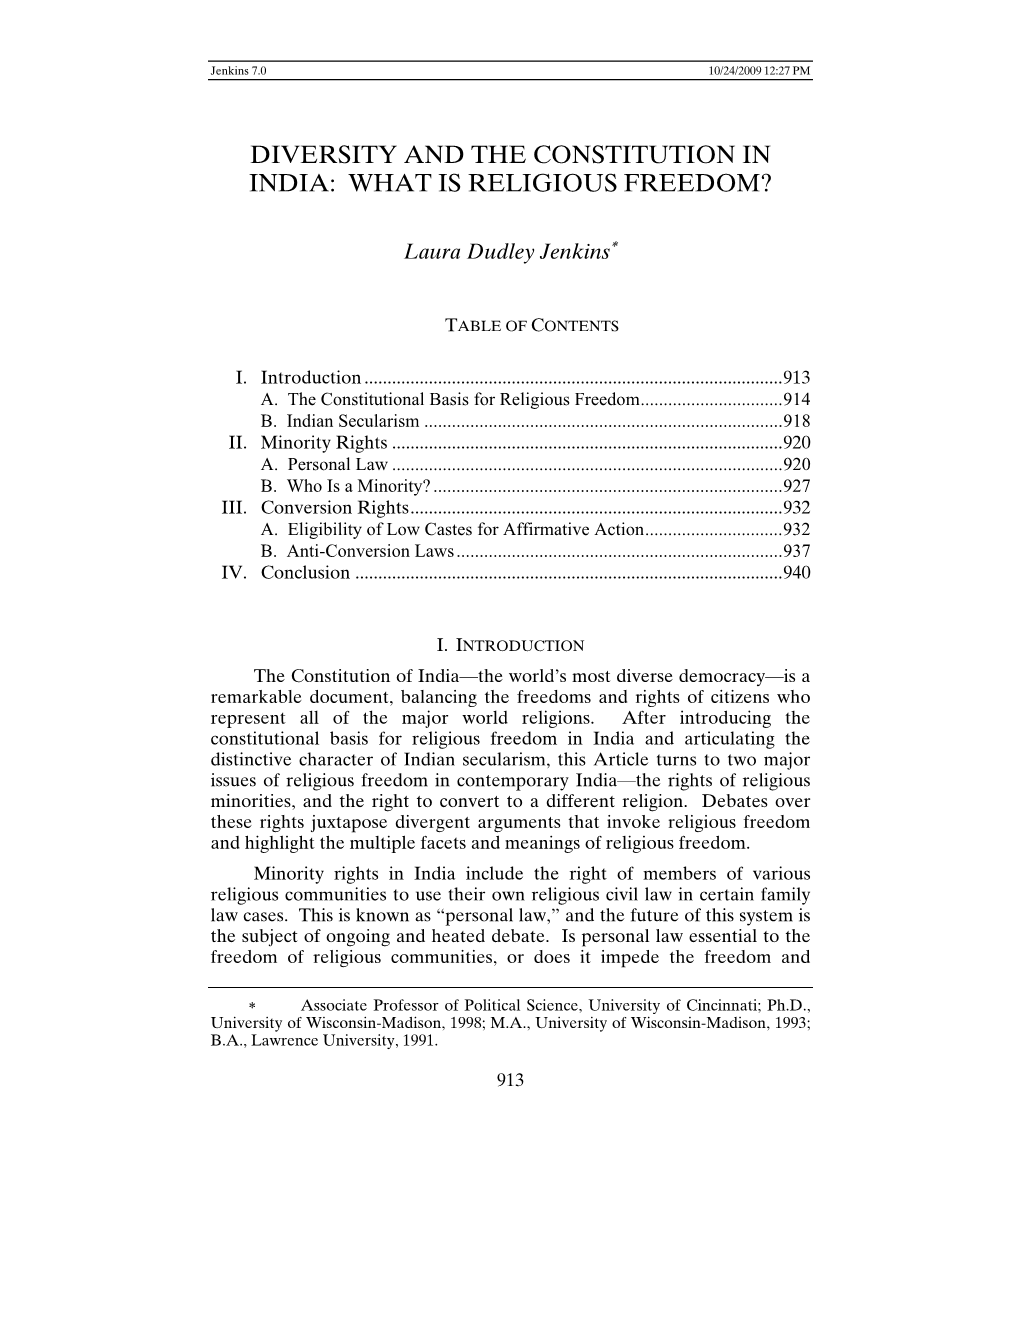 Diversity and the Constitution in India: What Is Religious Freedom?